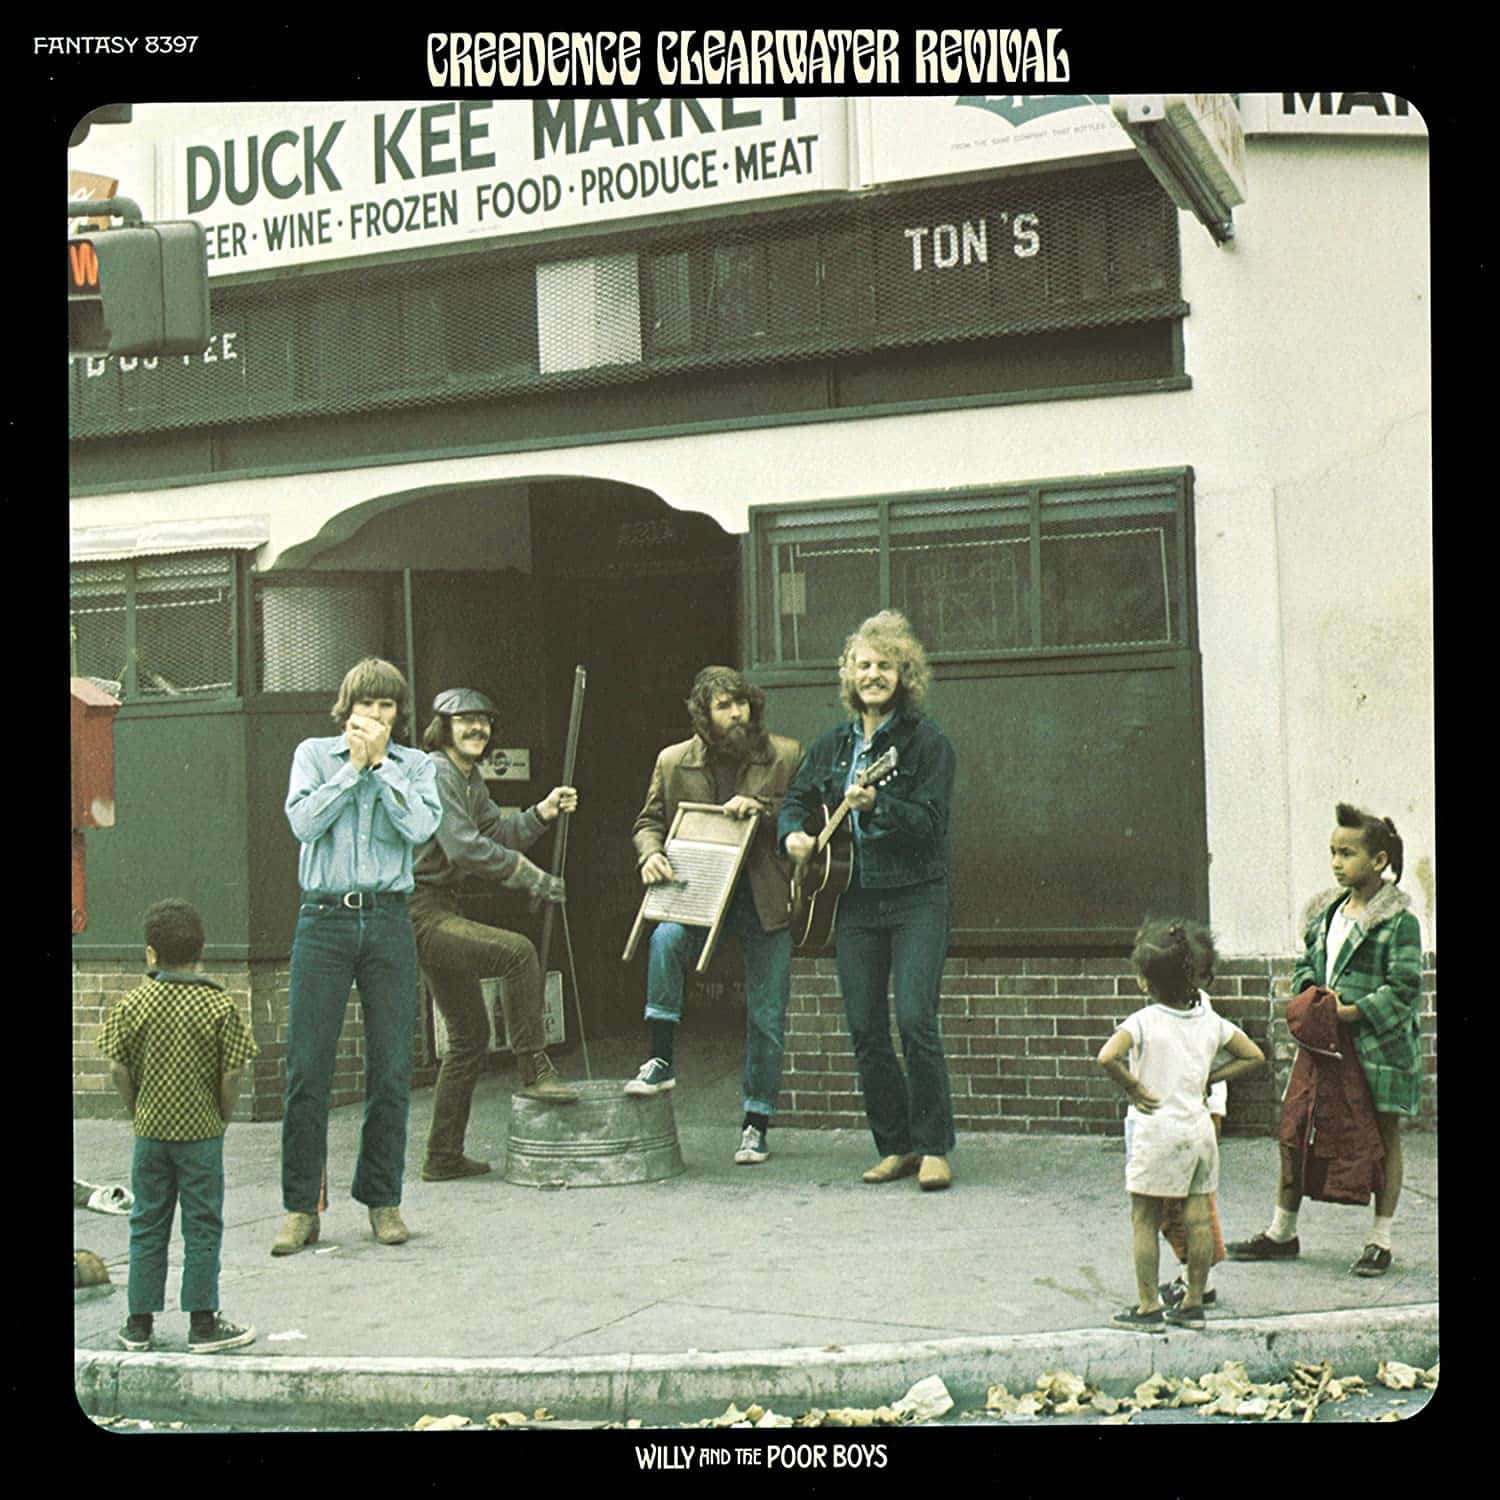 CREEDENCE CLEARWATER REVIVAL - WILLY AND THE POOR BOYS